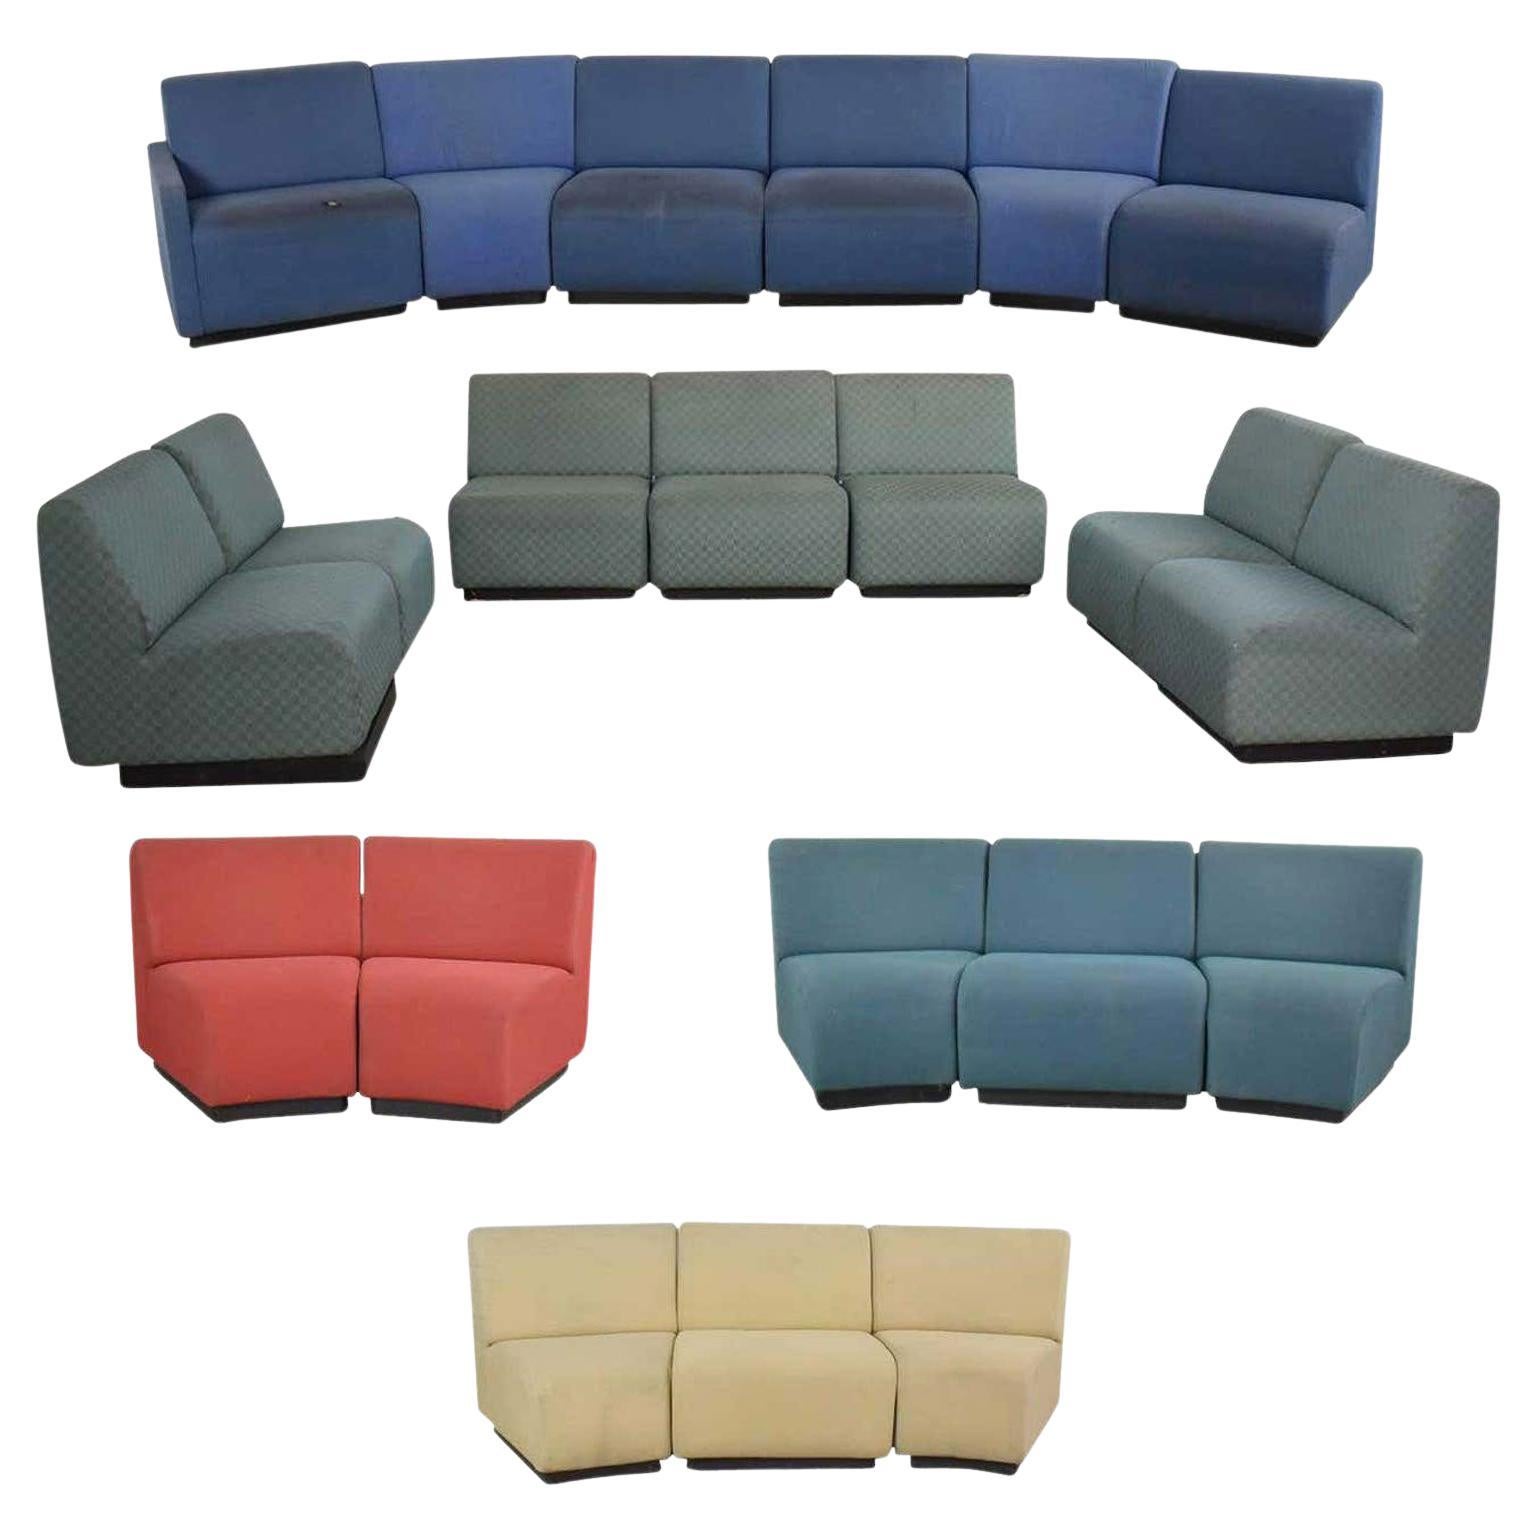 August Inc Modern Modular Sectional Sofa Straight & Wedge Pieces Style Chadwick For Sale